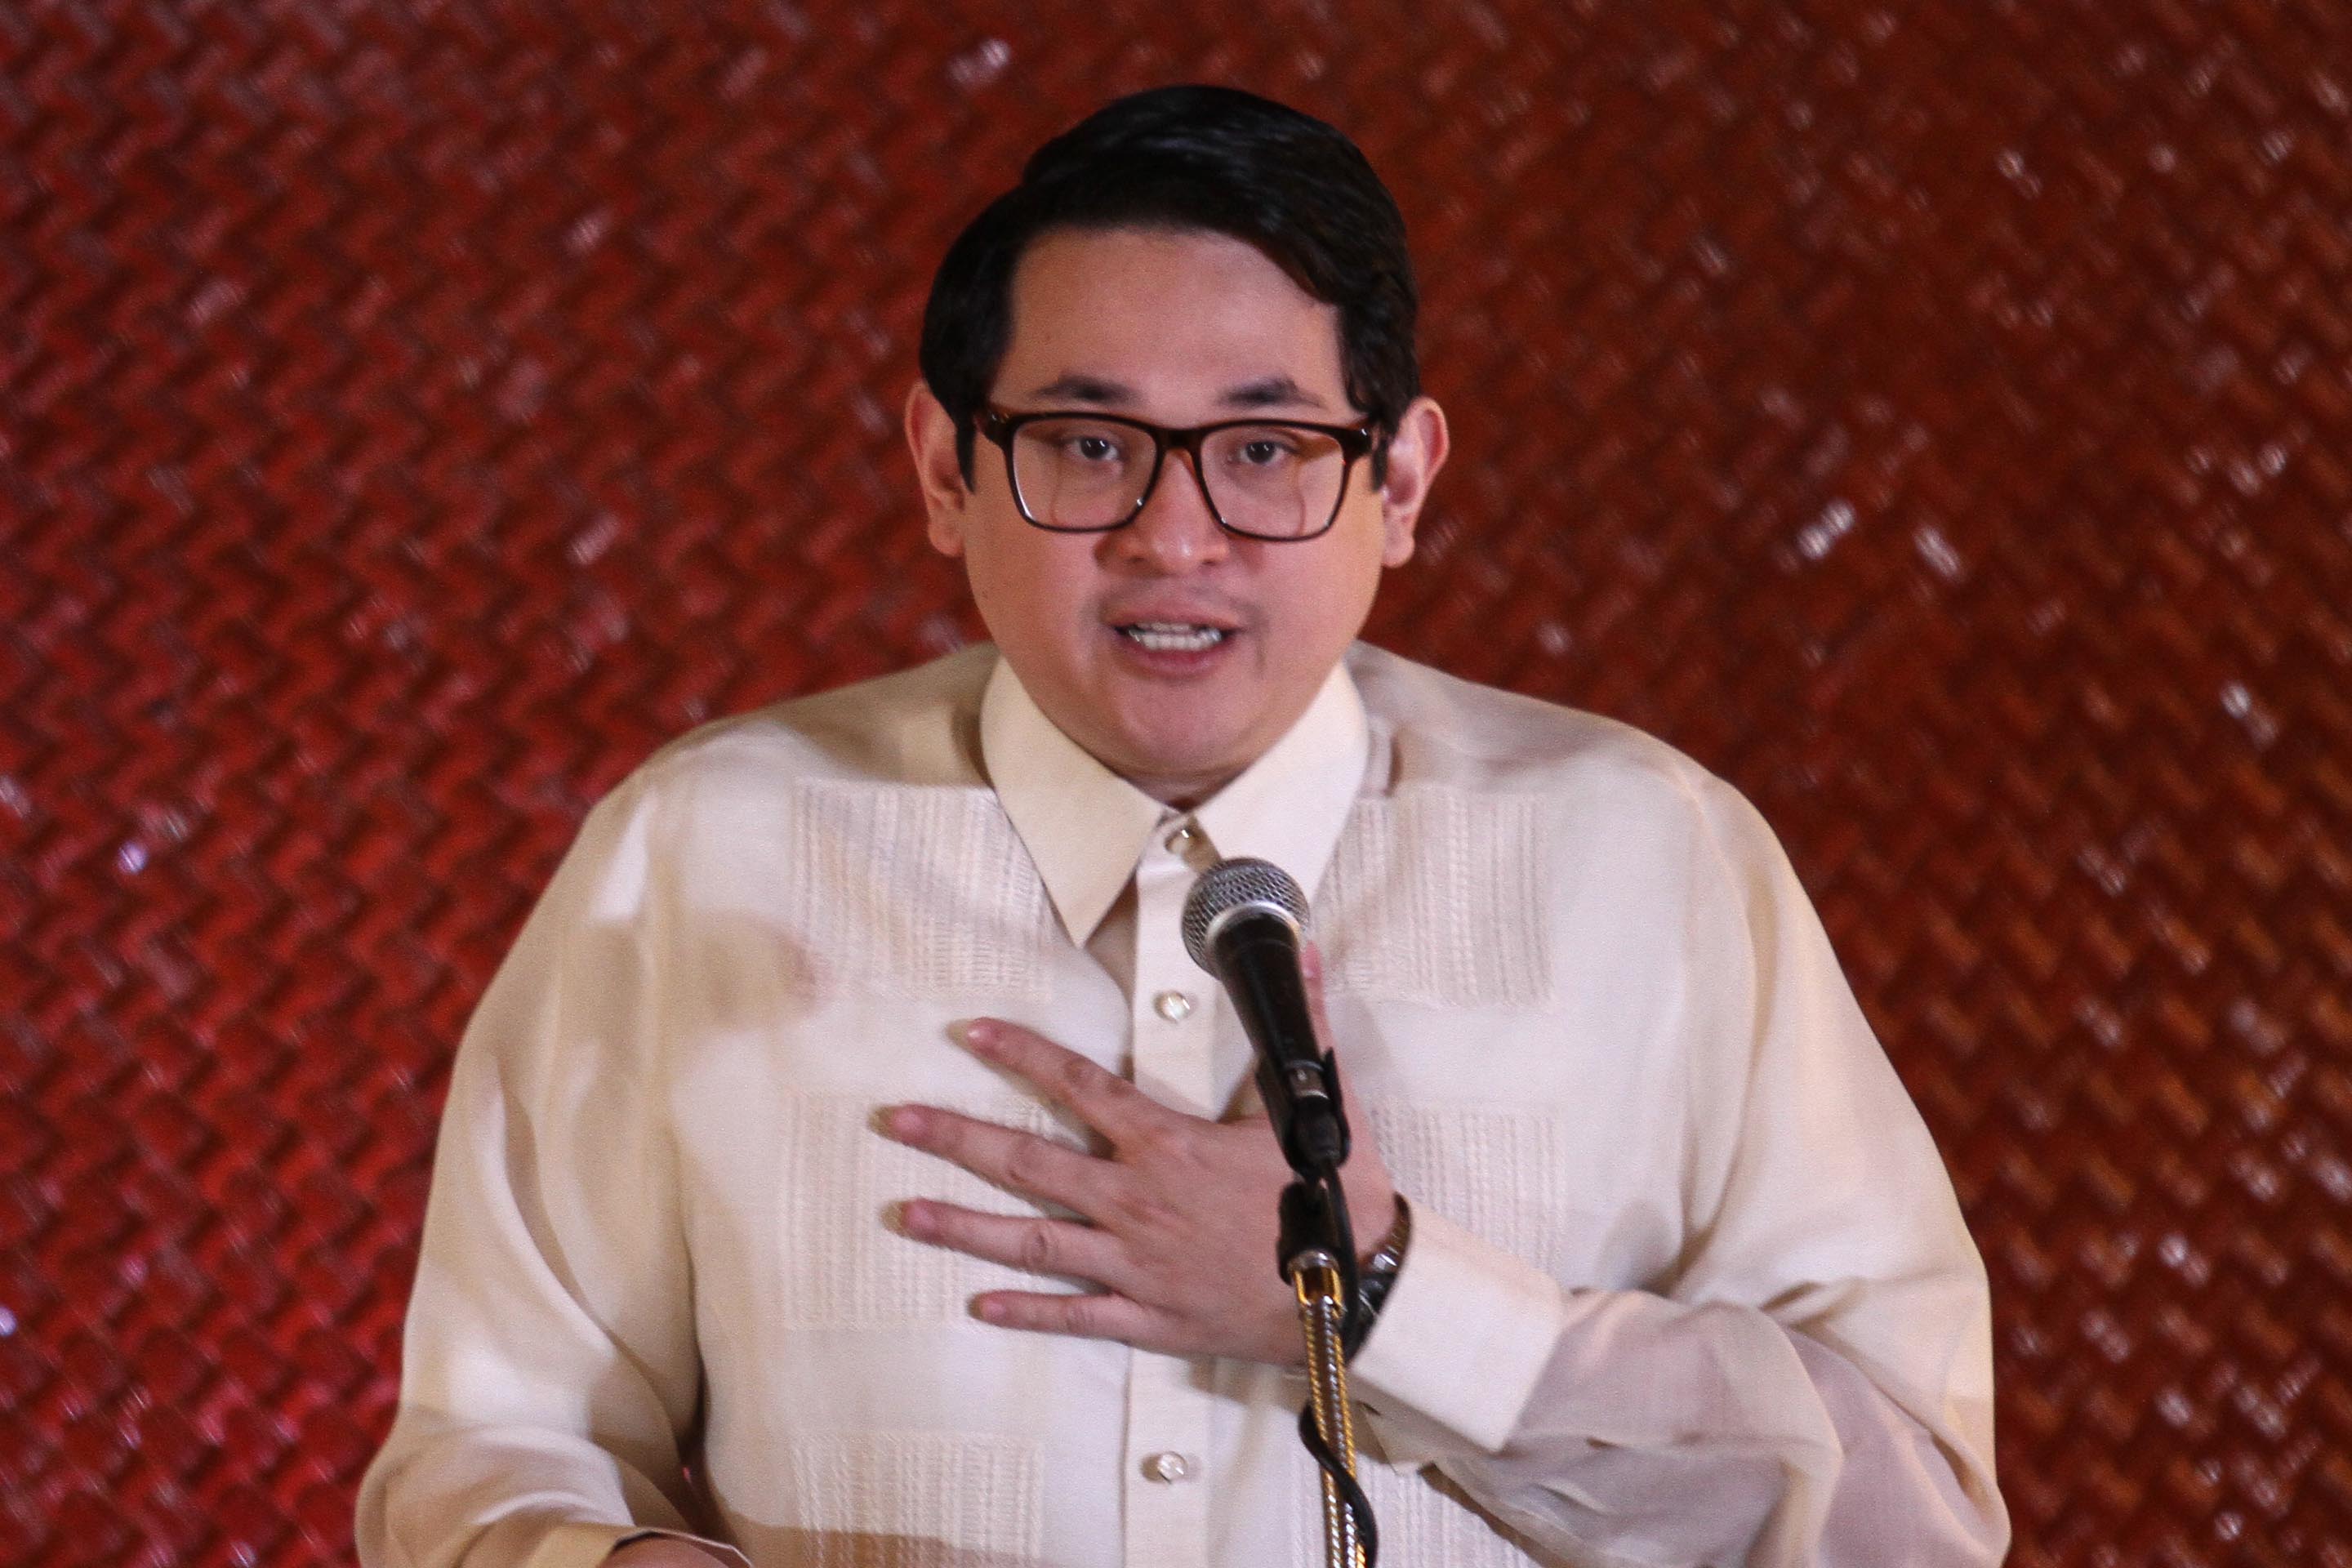 Senator Bam Aquino expressed his admiration for the winners and finalists of the 13th TAYO Awards. The winners and finalists, Aquino said, should serve as inspiration for other Filipino youth.